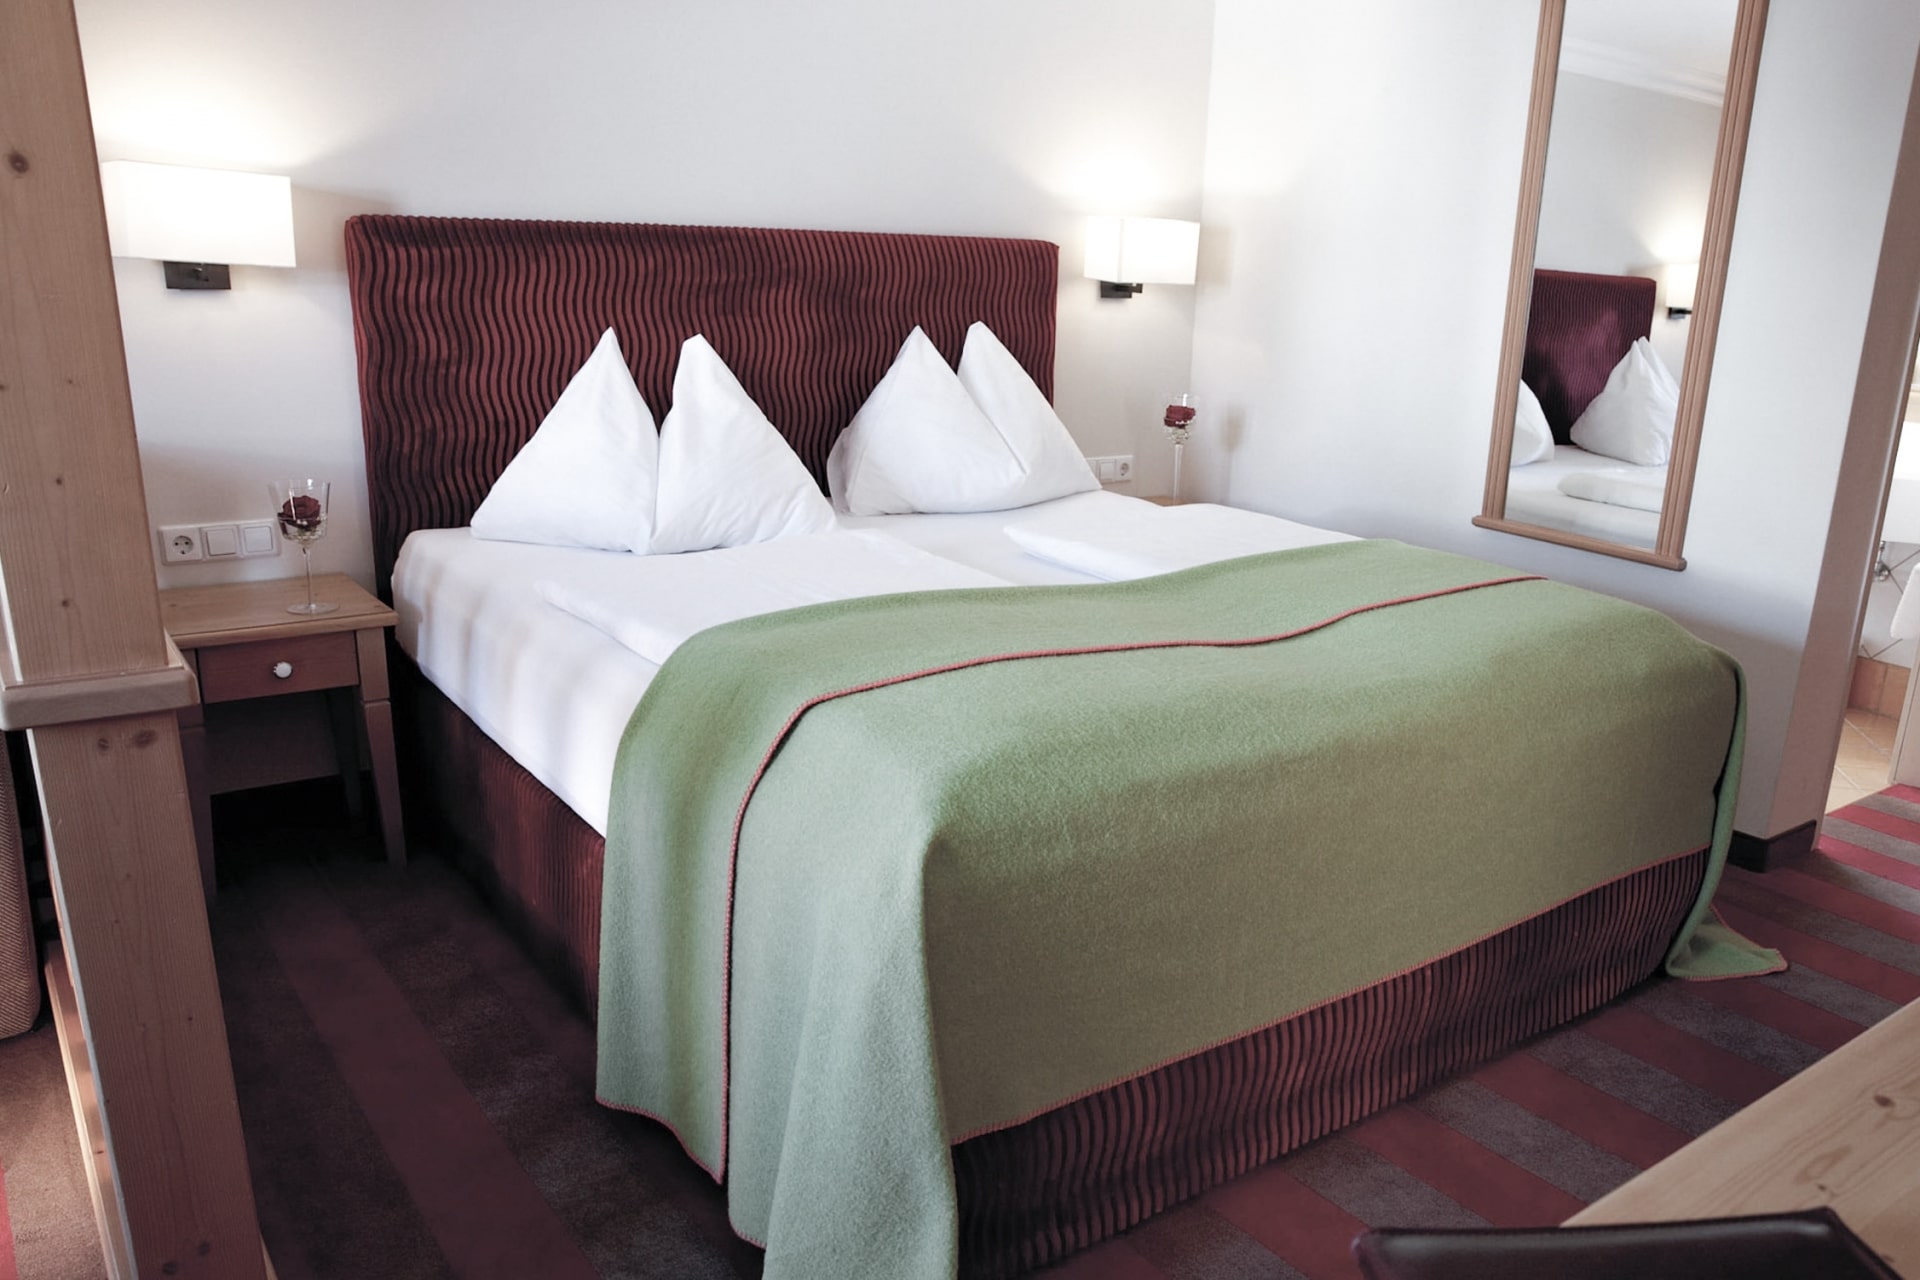 A neatly arranged hotel room with a plush double bed, featuring a burgundy headboard, crisp white sheets, a green bedspread with a red trim, and fluffed white pillows. a bedside table, lamp, and a mirror reflecting part of the room are also visible, creating a cozy and inviting atmosphere.